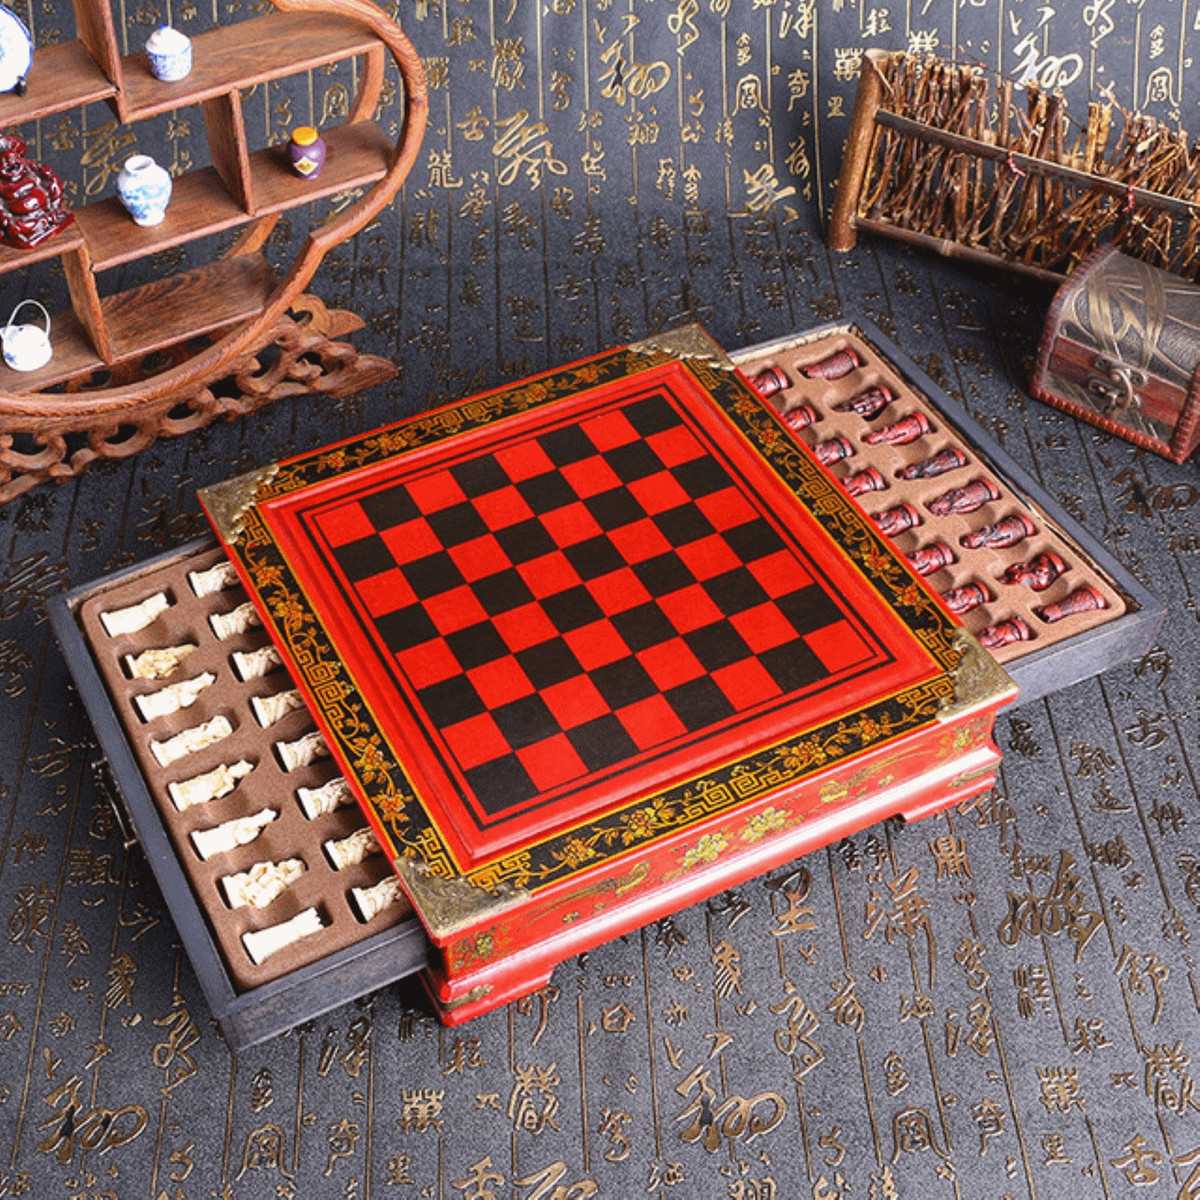 32Pcs/Set Wooden Table Chess Chinese Chess Games Resin Chessman Christmas Birthday Premium Gifts Entertainment Board Game